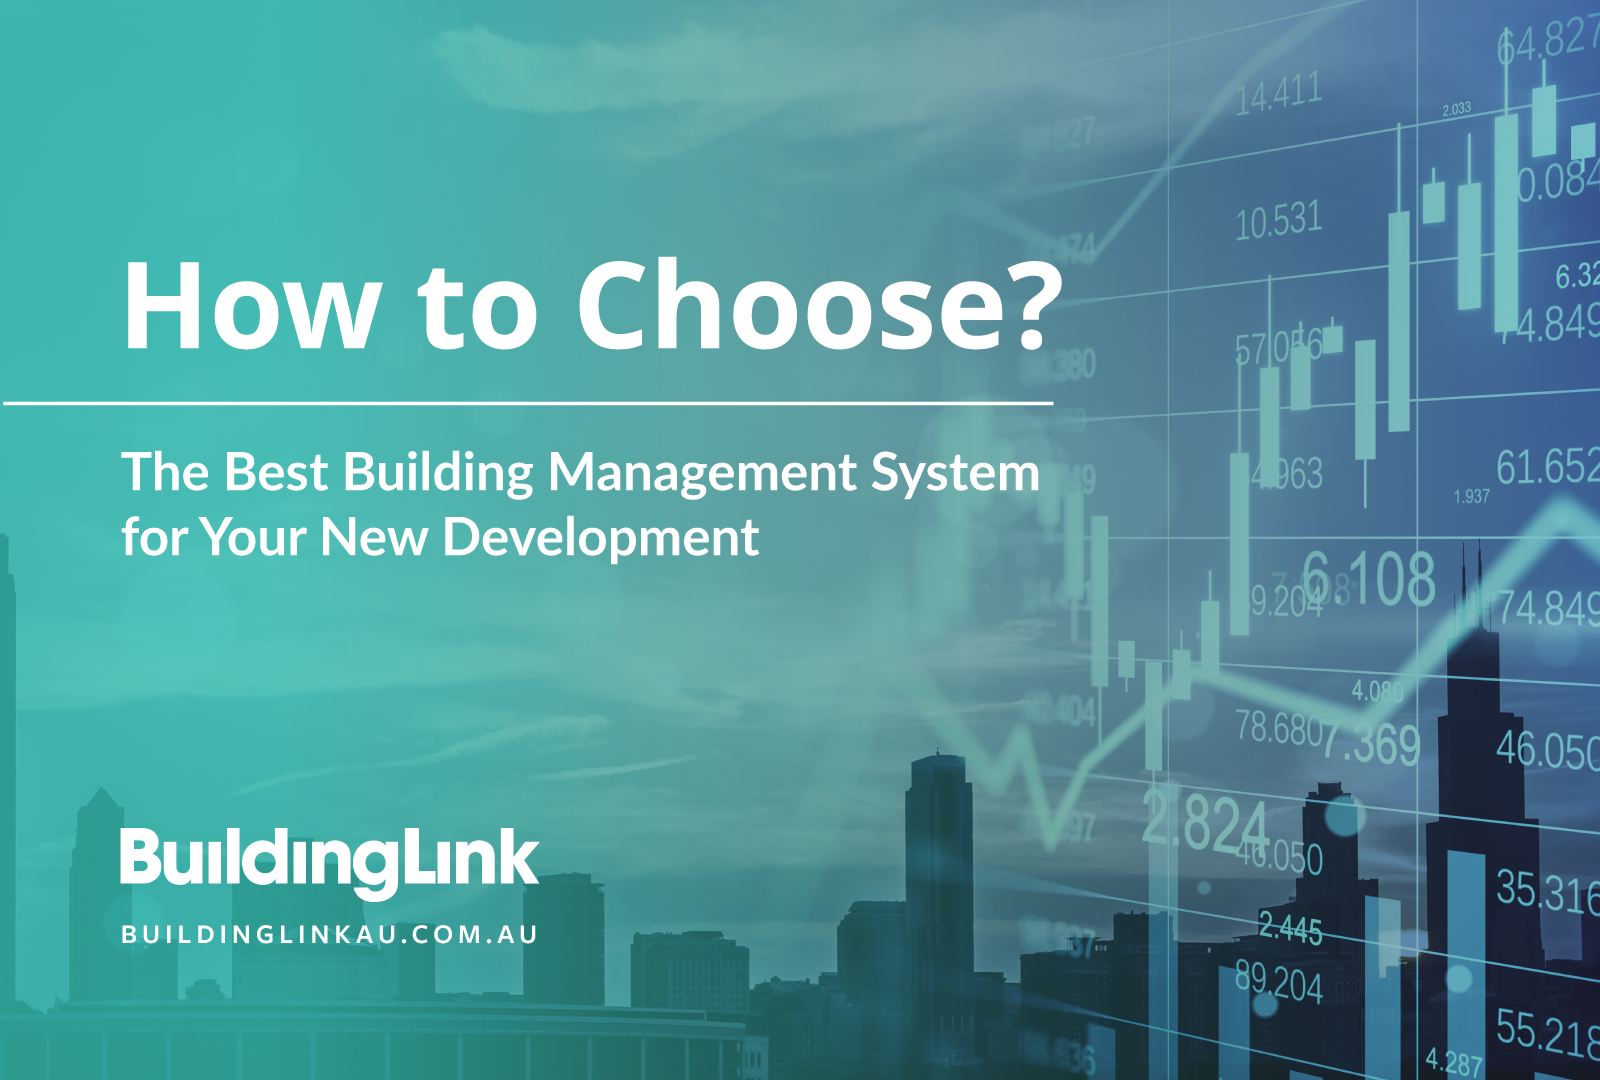 Title image how to choose a building management system